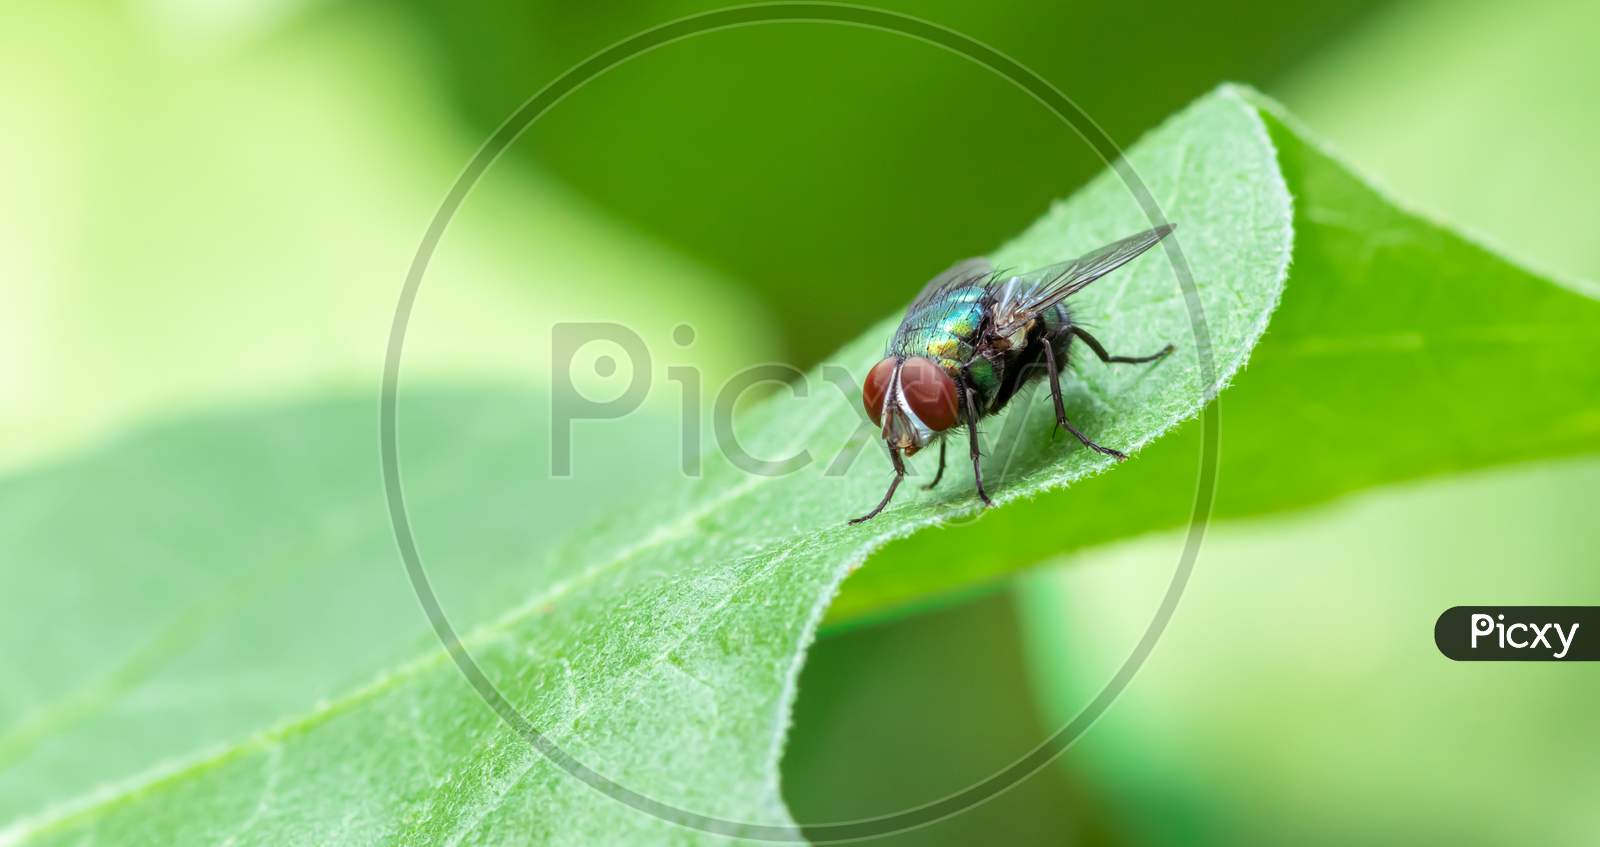 Common Housefly On A Green Leaf In The Garden Close Up Macro Photograph